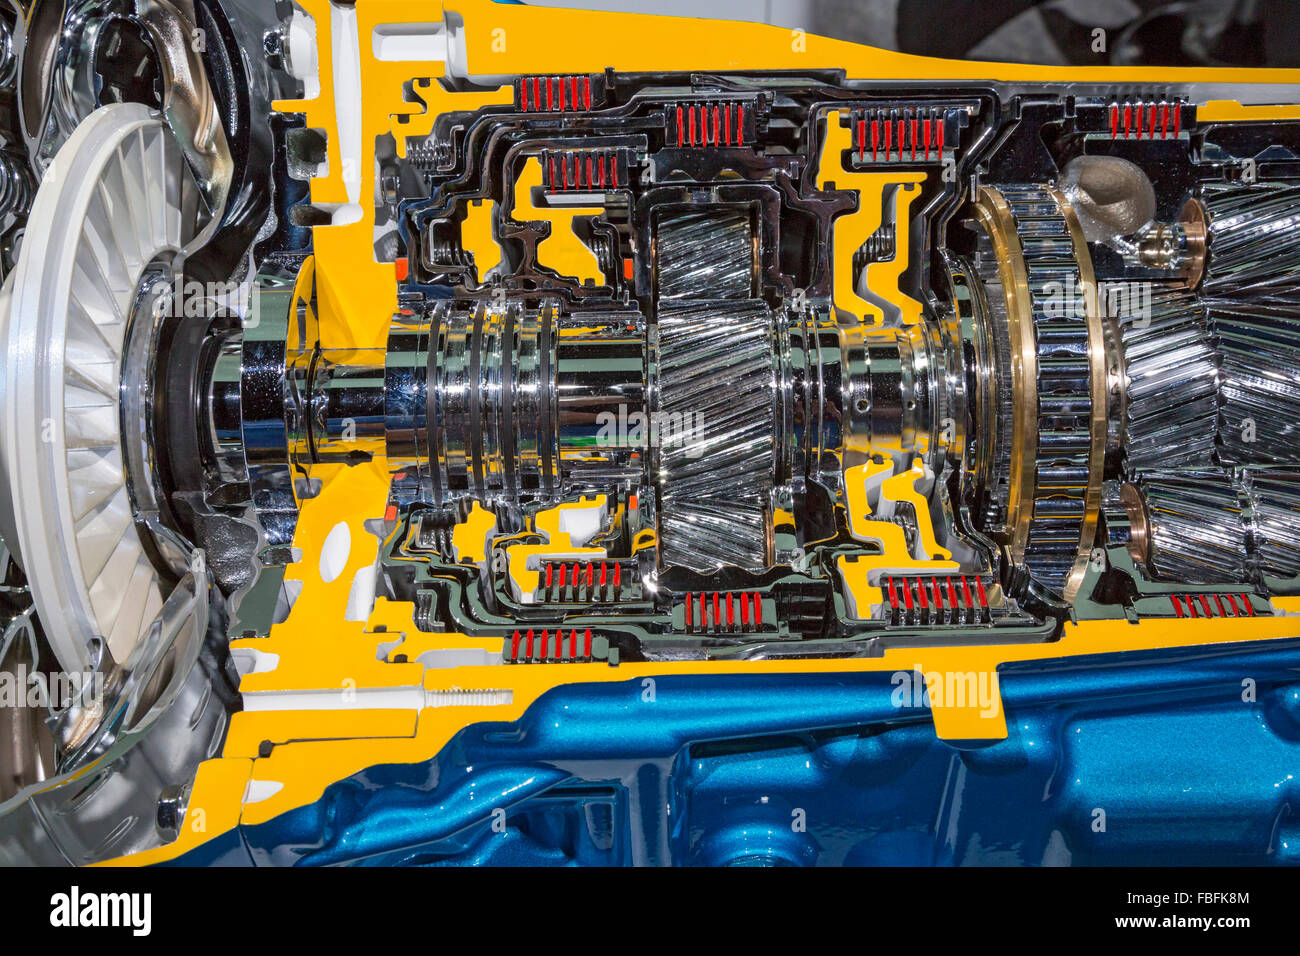 Detroit, Michigan - The Aisin Group's eight-speed automatic transmission for rear wheel drive vehicles. Stock Photo